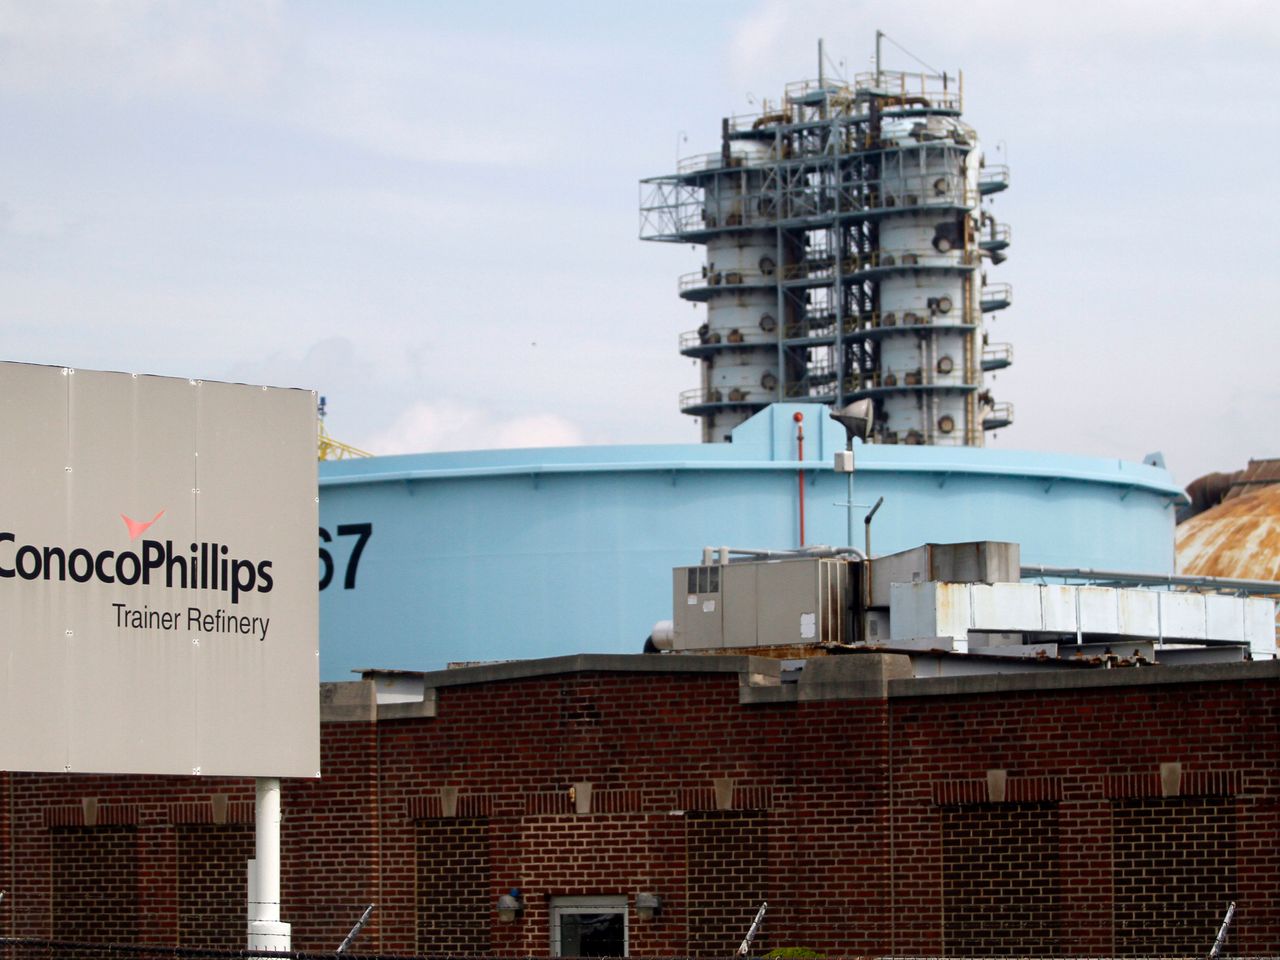 US ConocoPhillips is trying to recover its debt to Venezuela with an oil sale deal